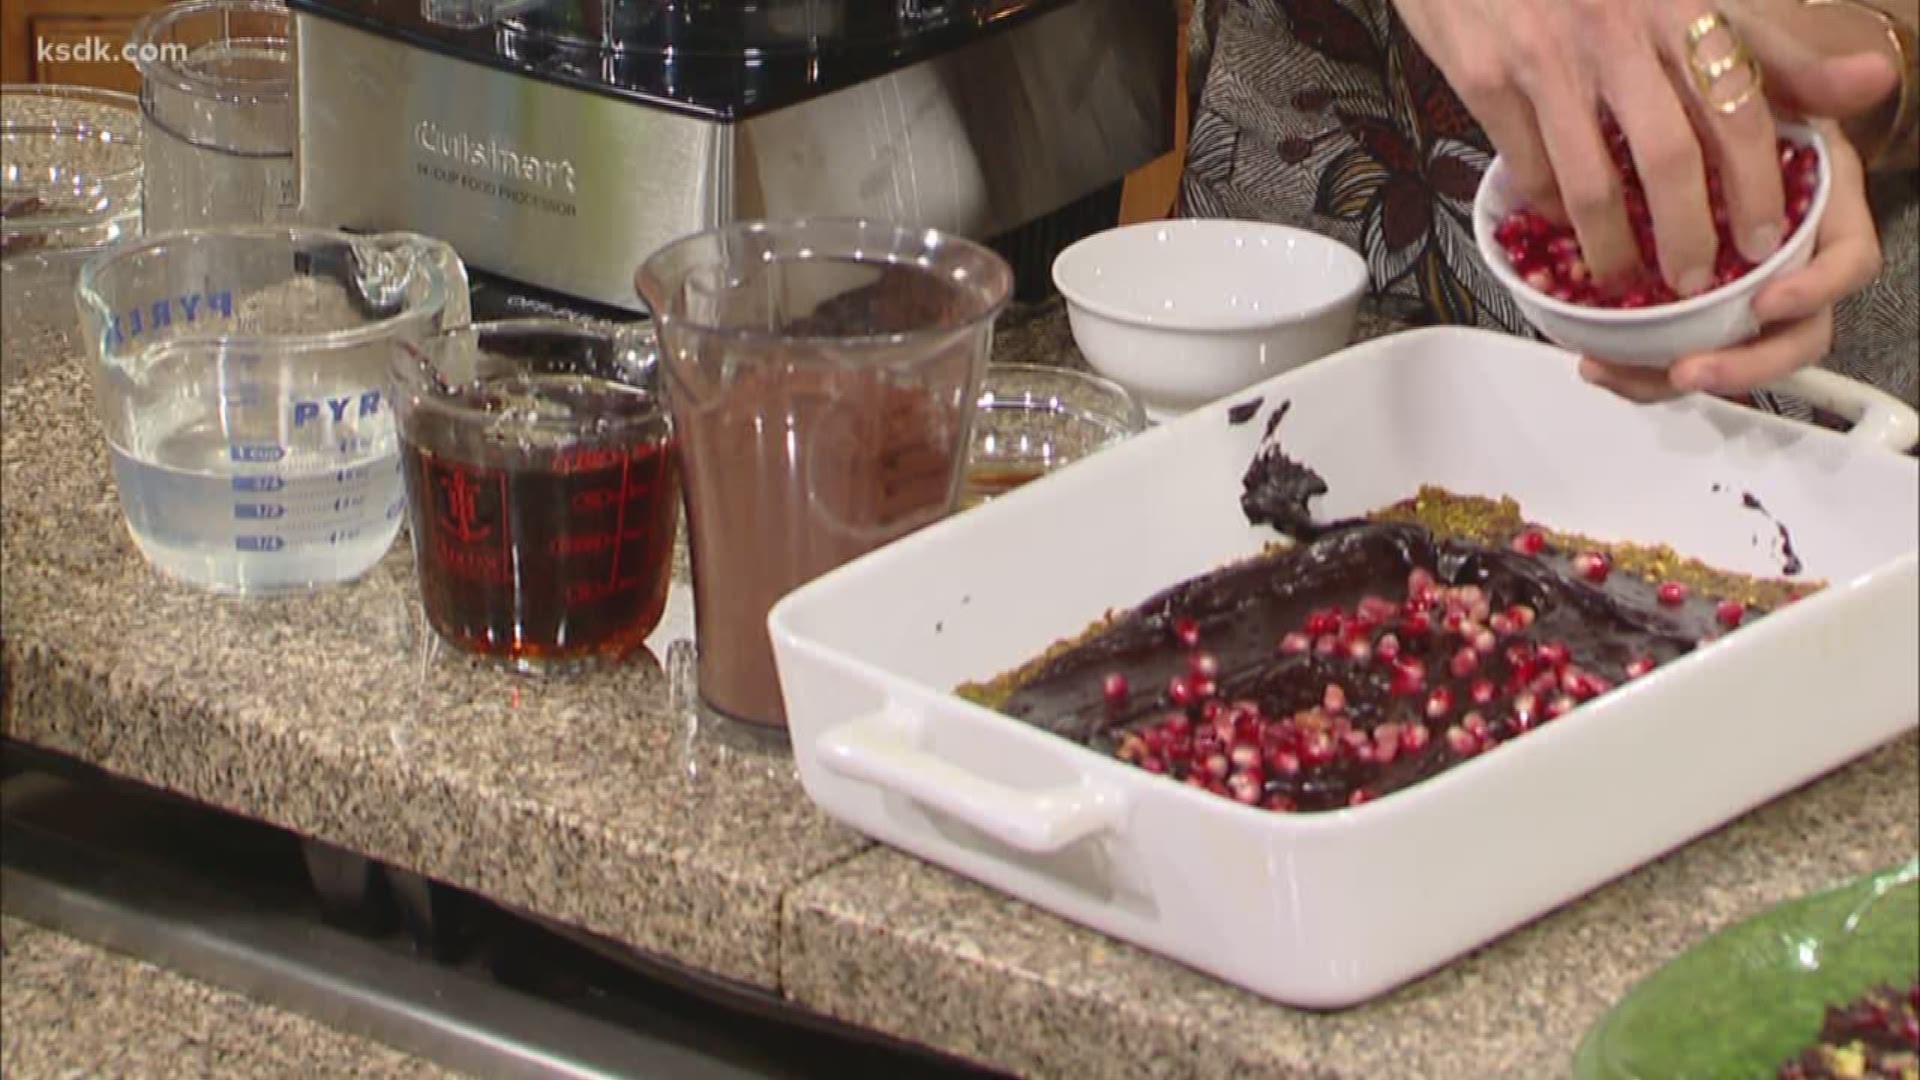 Jennifer McDaniel of McDaniel Nutrition Therapy shared a recipe for a nutritious dessert!